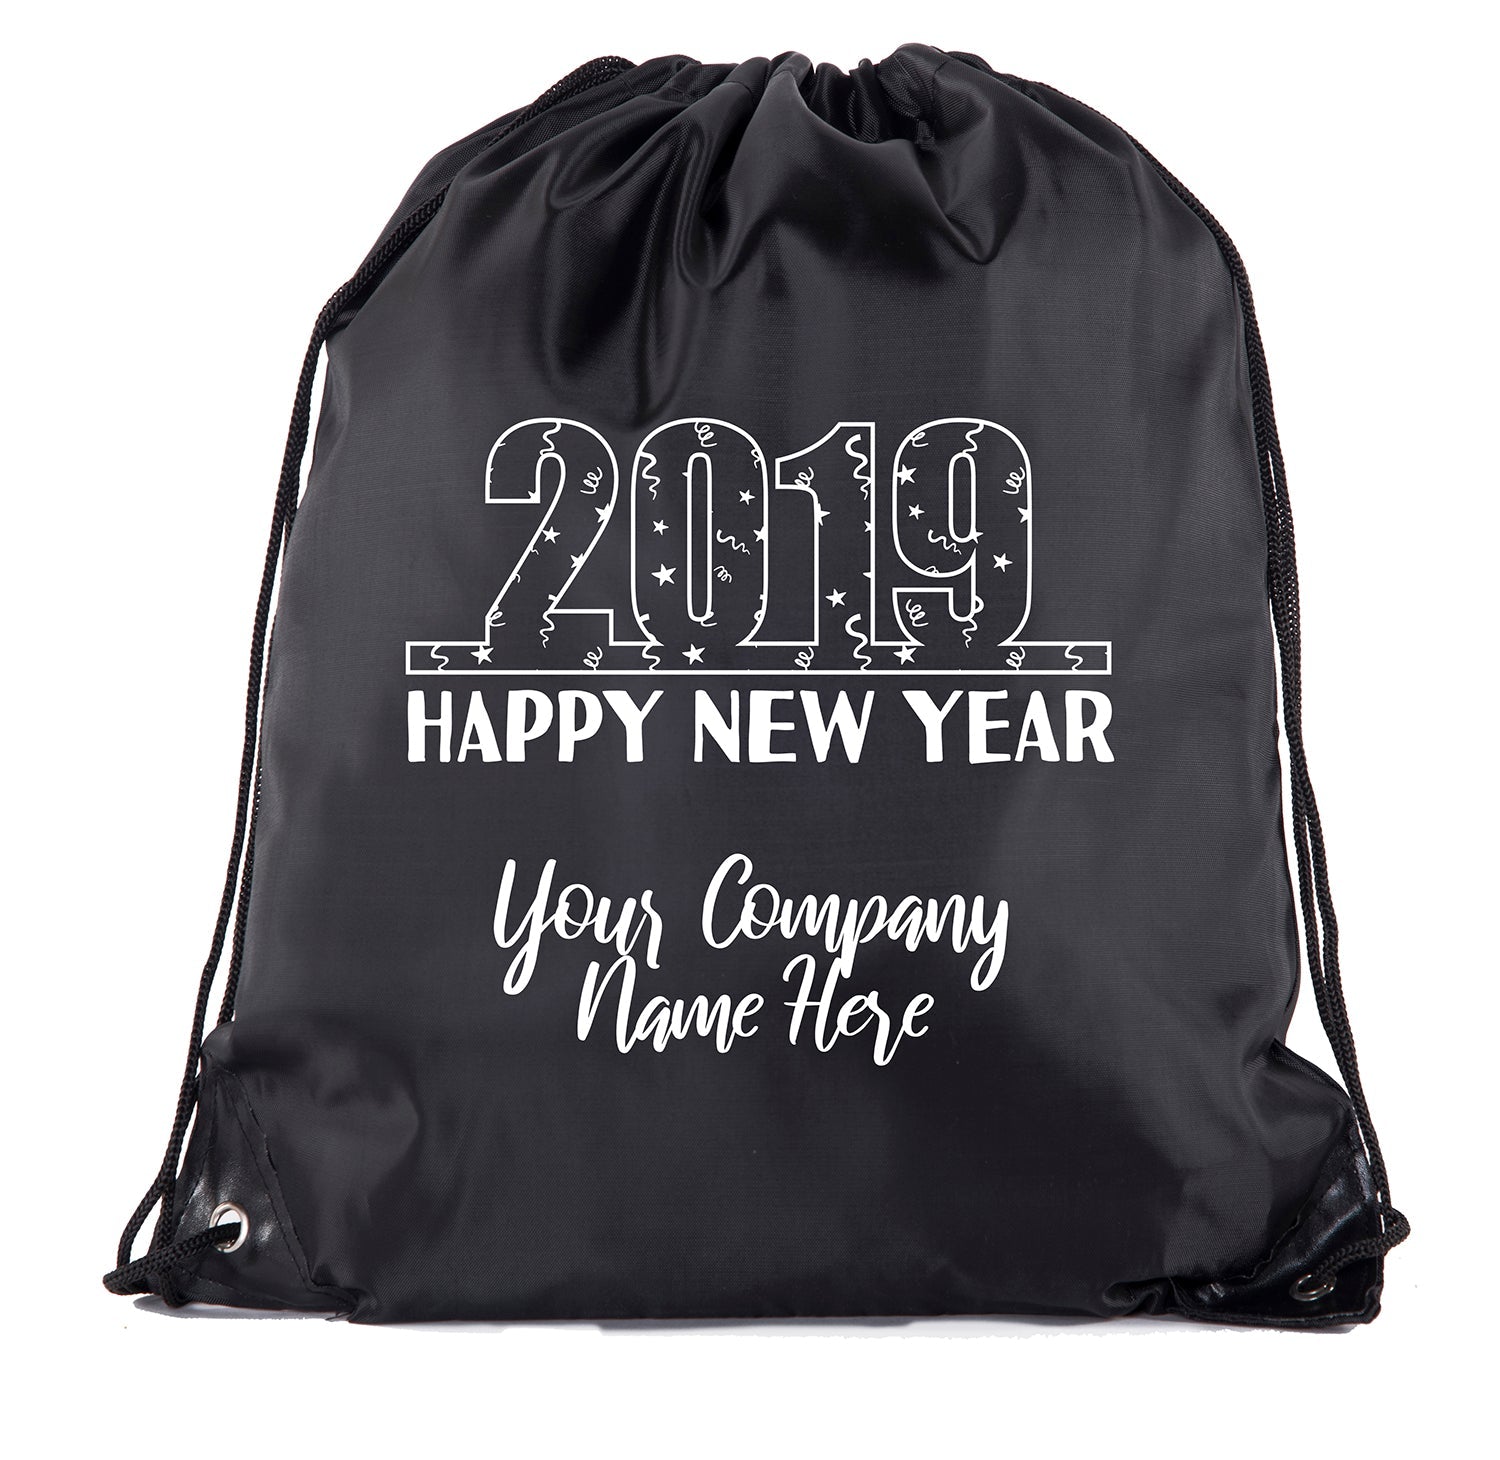 Accessory - New Year’s Eve Party Goody Bags, New Years Decorations, 2019 Gift Bags - Custom Company Name